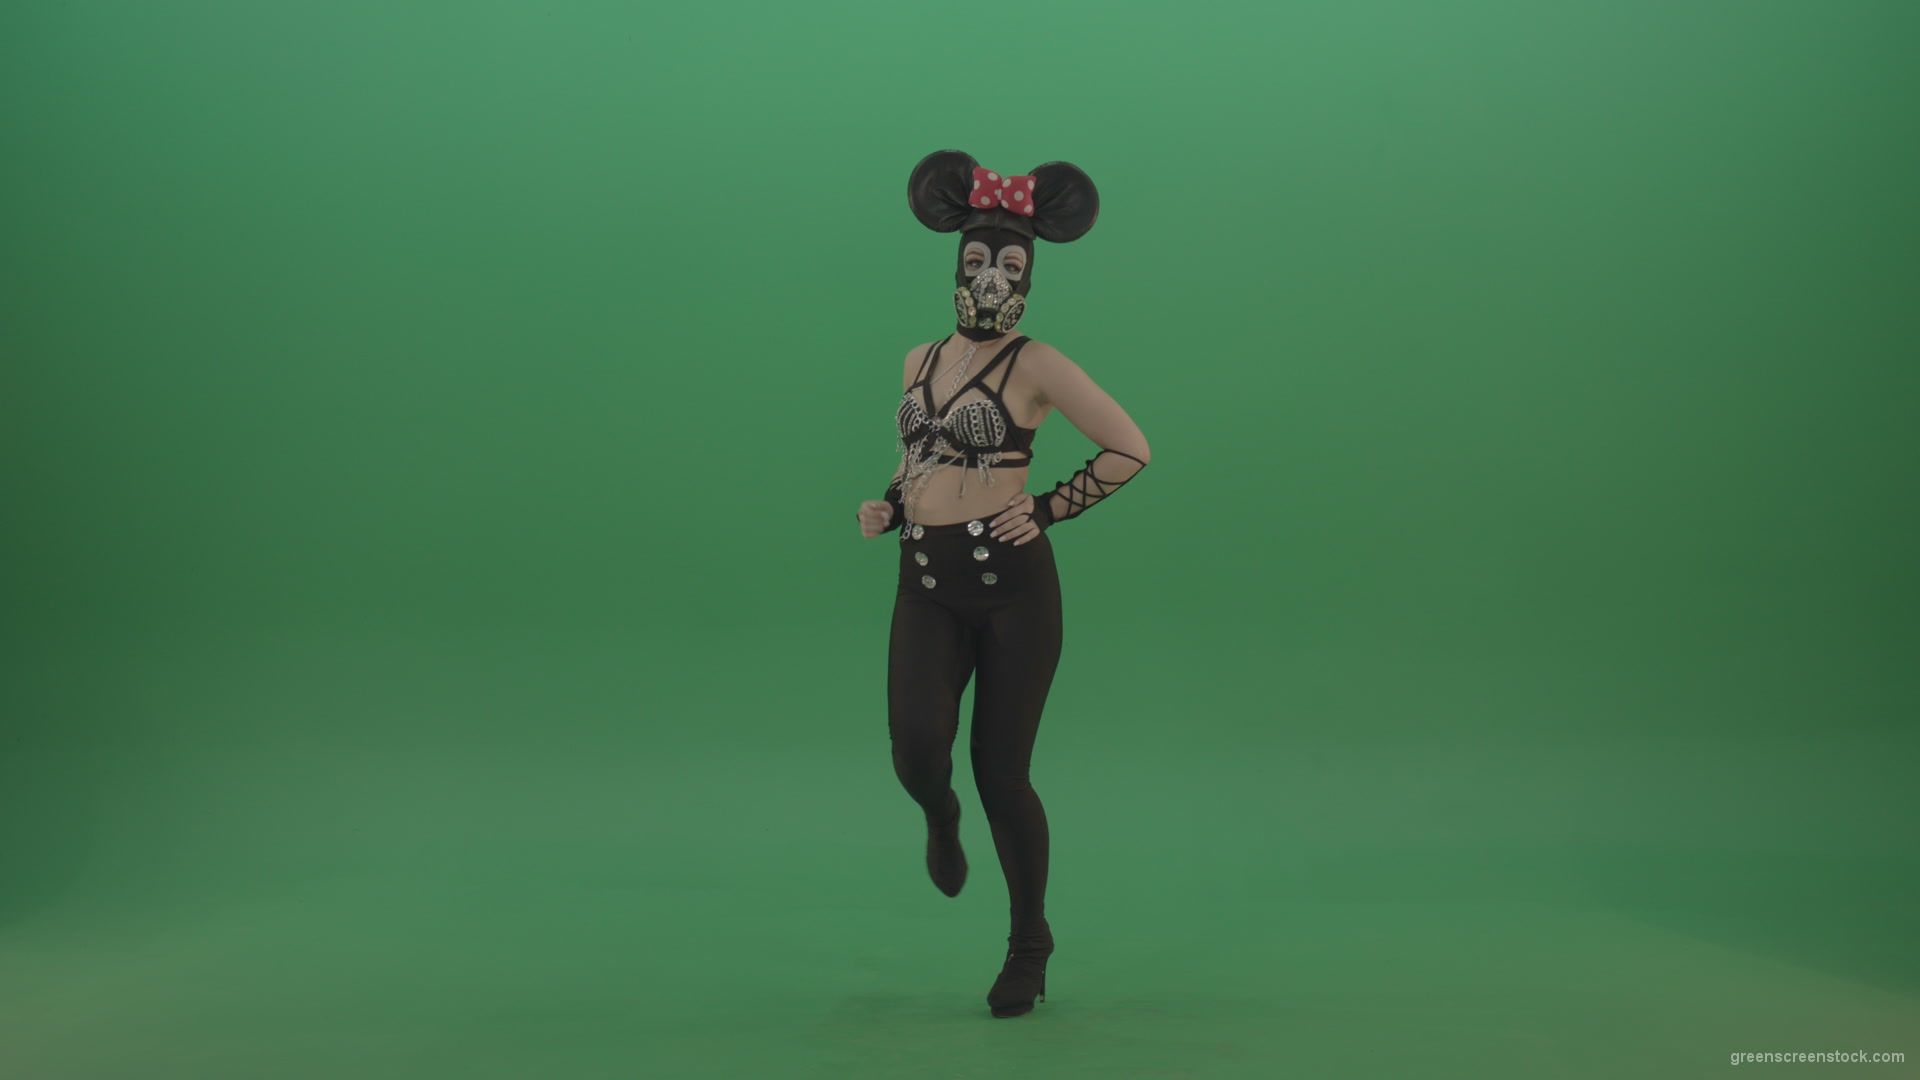 Mouse-Girl-in-mask-dancing-go-go-shaking-ass-and-posing-on-green-screen_006 Green Screen Stock